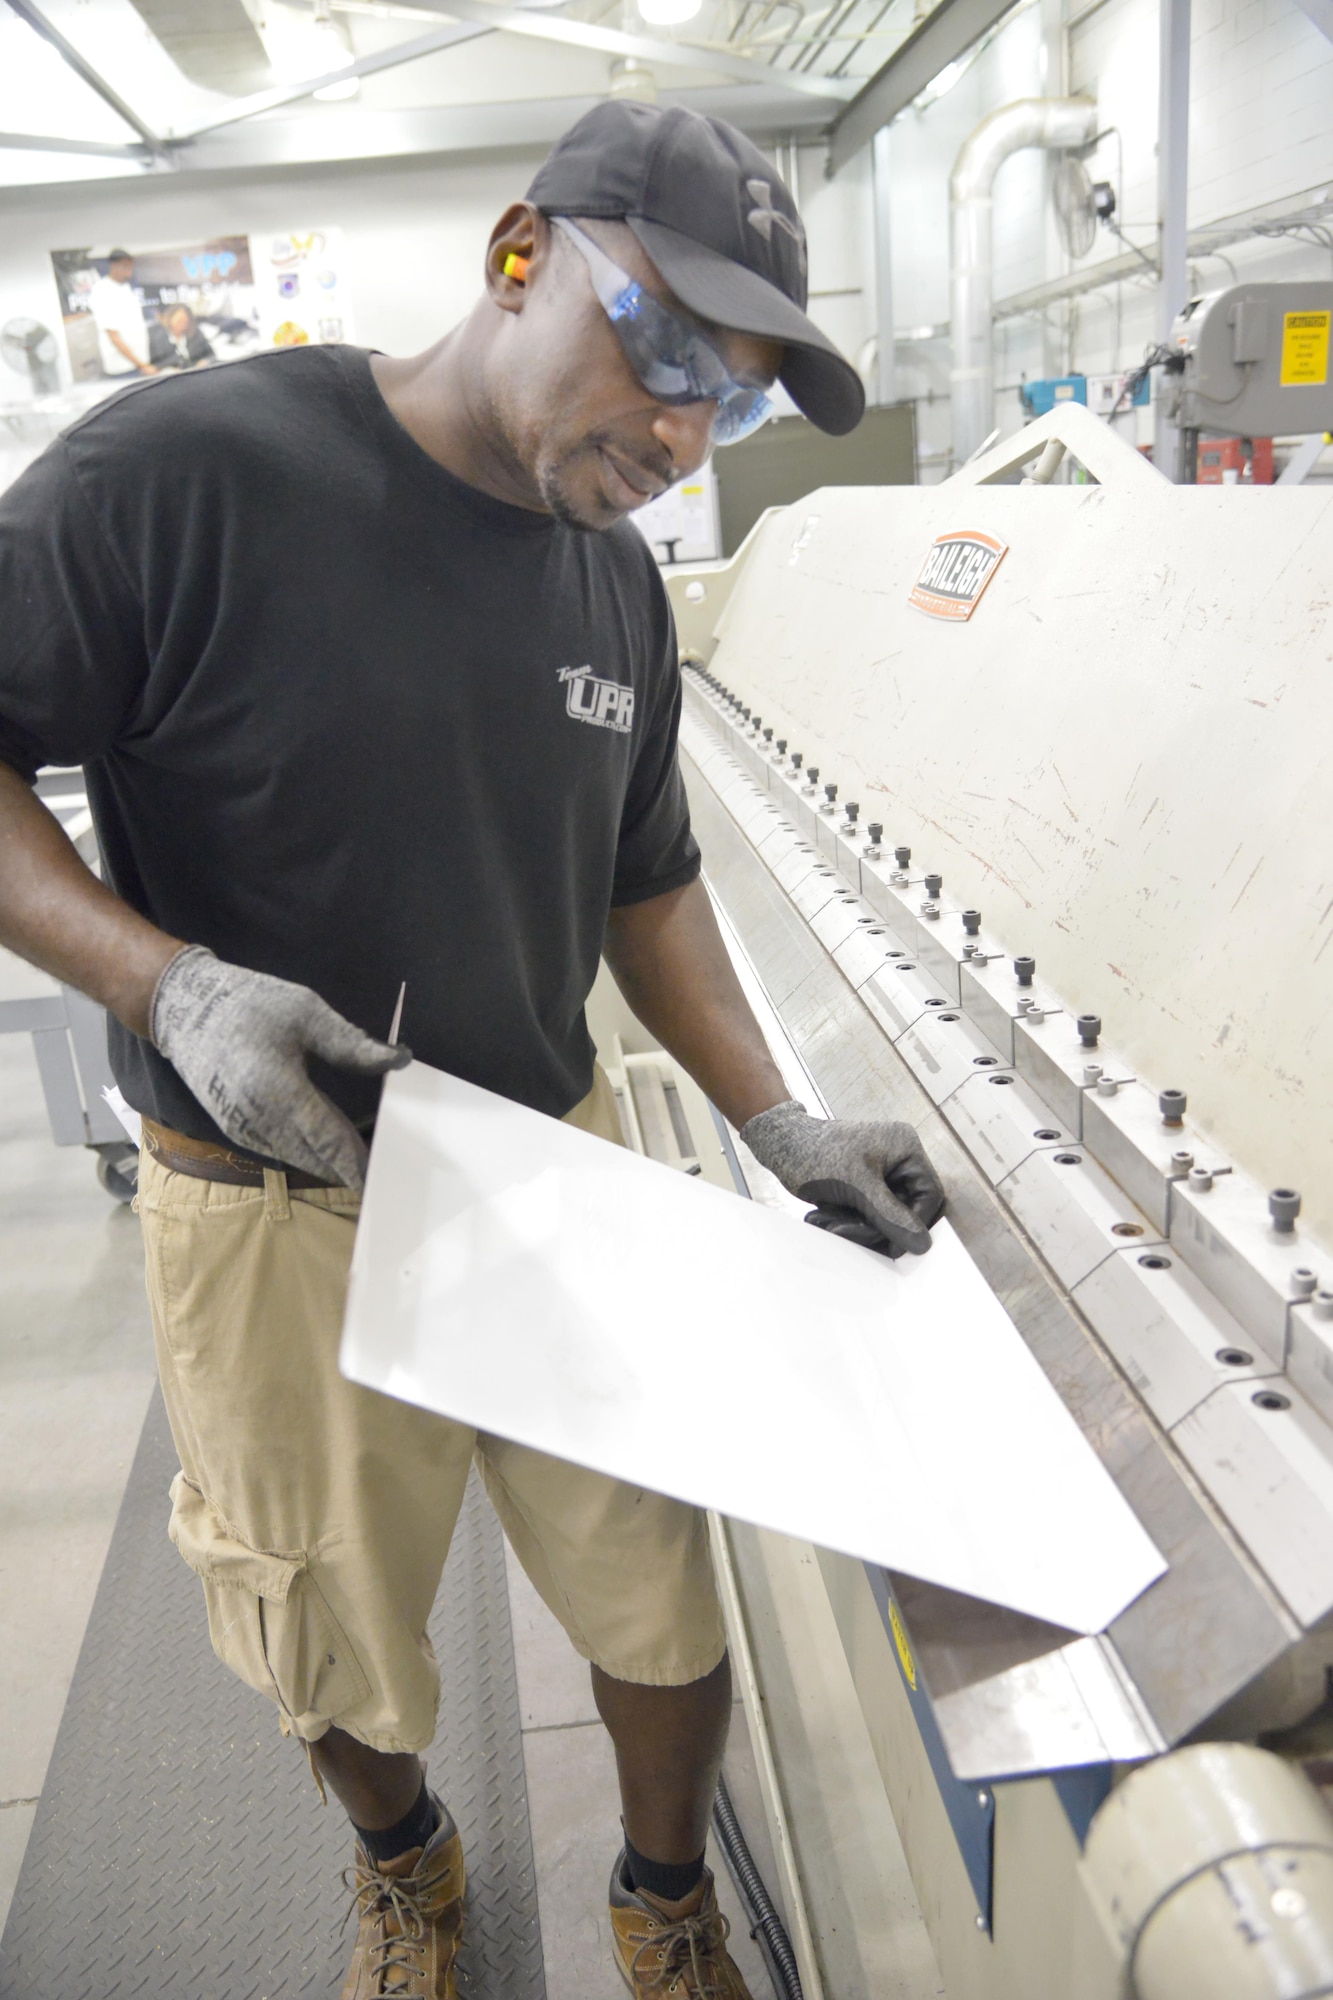 Keith Felder, 402nd Maintenance Support Group sheet metal specialist, performs sheet metal fabrication. The 402nd MXSG is comprised of 400-plus employees at 12 work sites, to include infrastructure engineering, chemical laboratories and the Precision Measurement Equipment Laboratory. (U.S. Air Force photo by Ray Crayton)